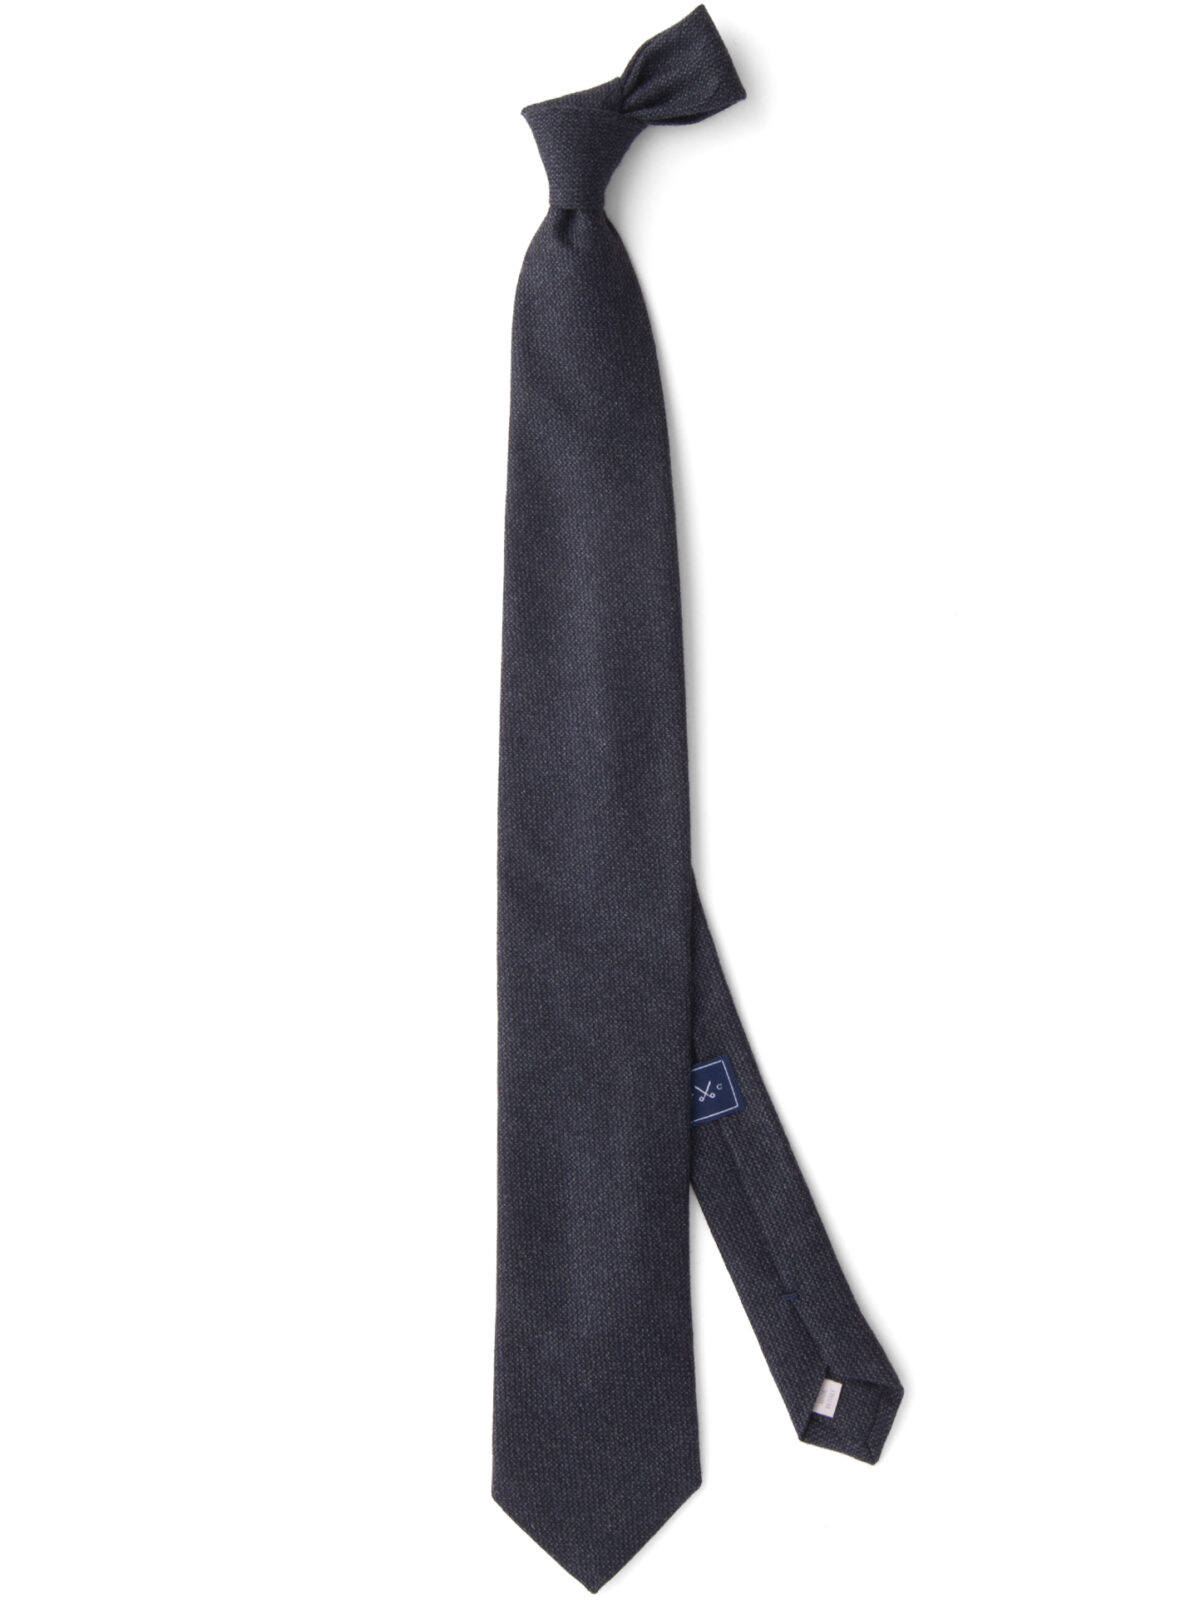 Charcoal Solid Cashmere Tie